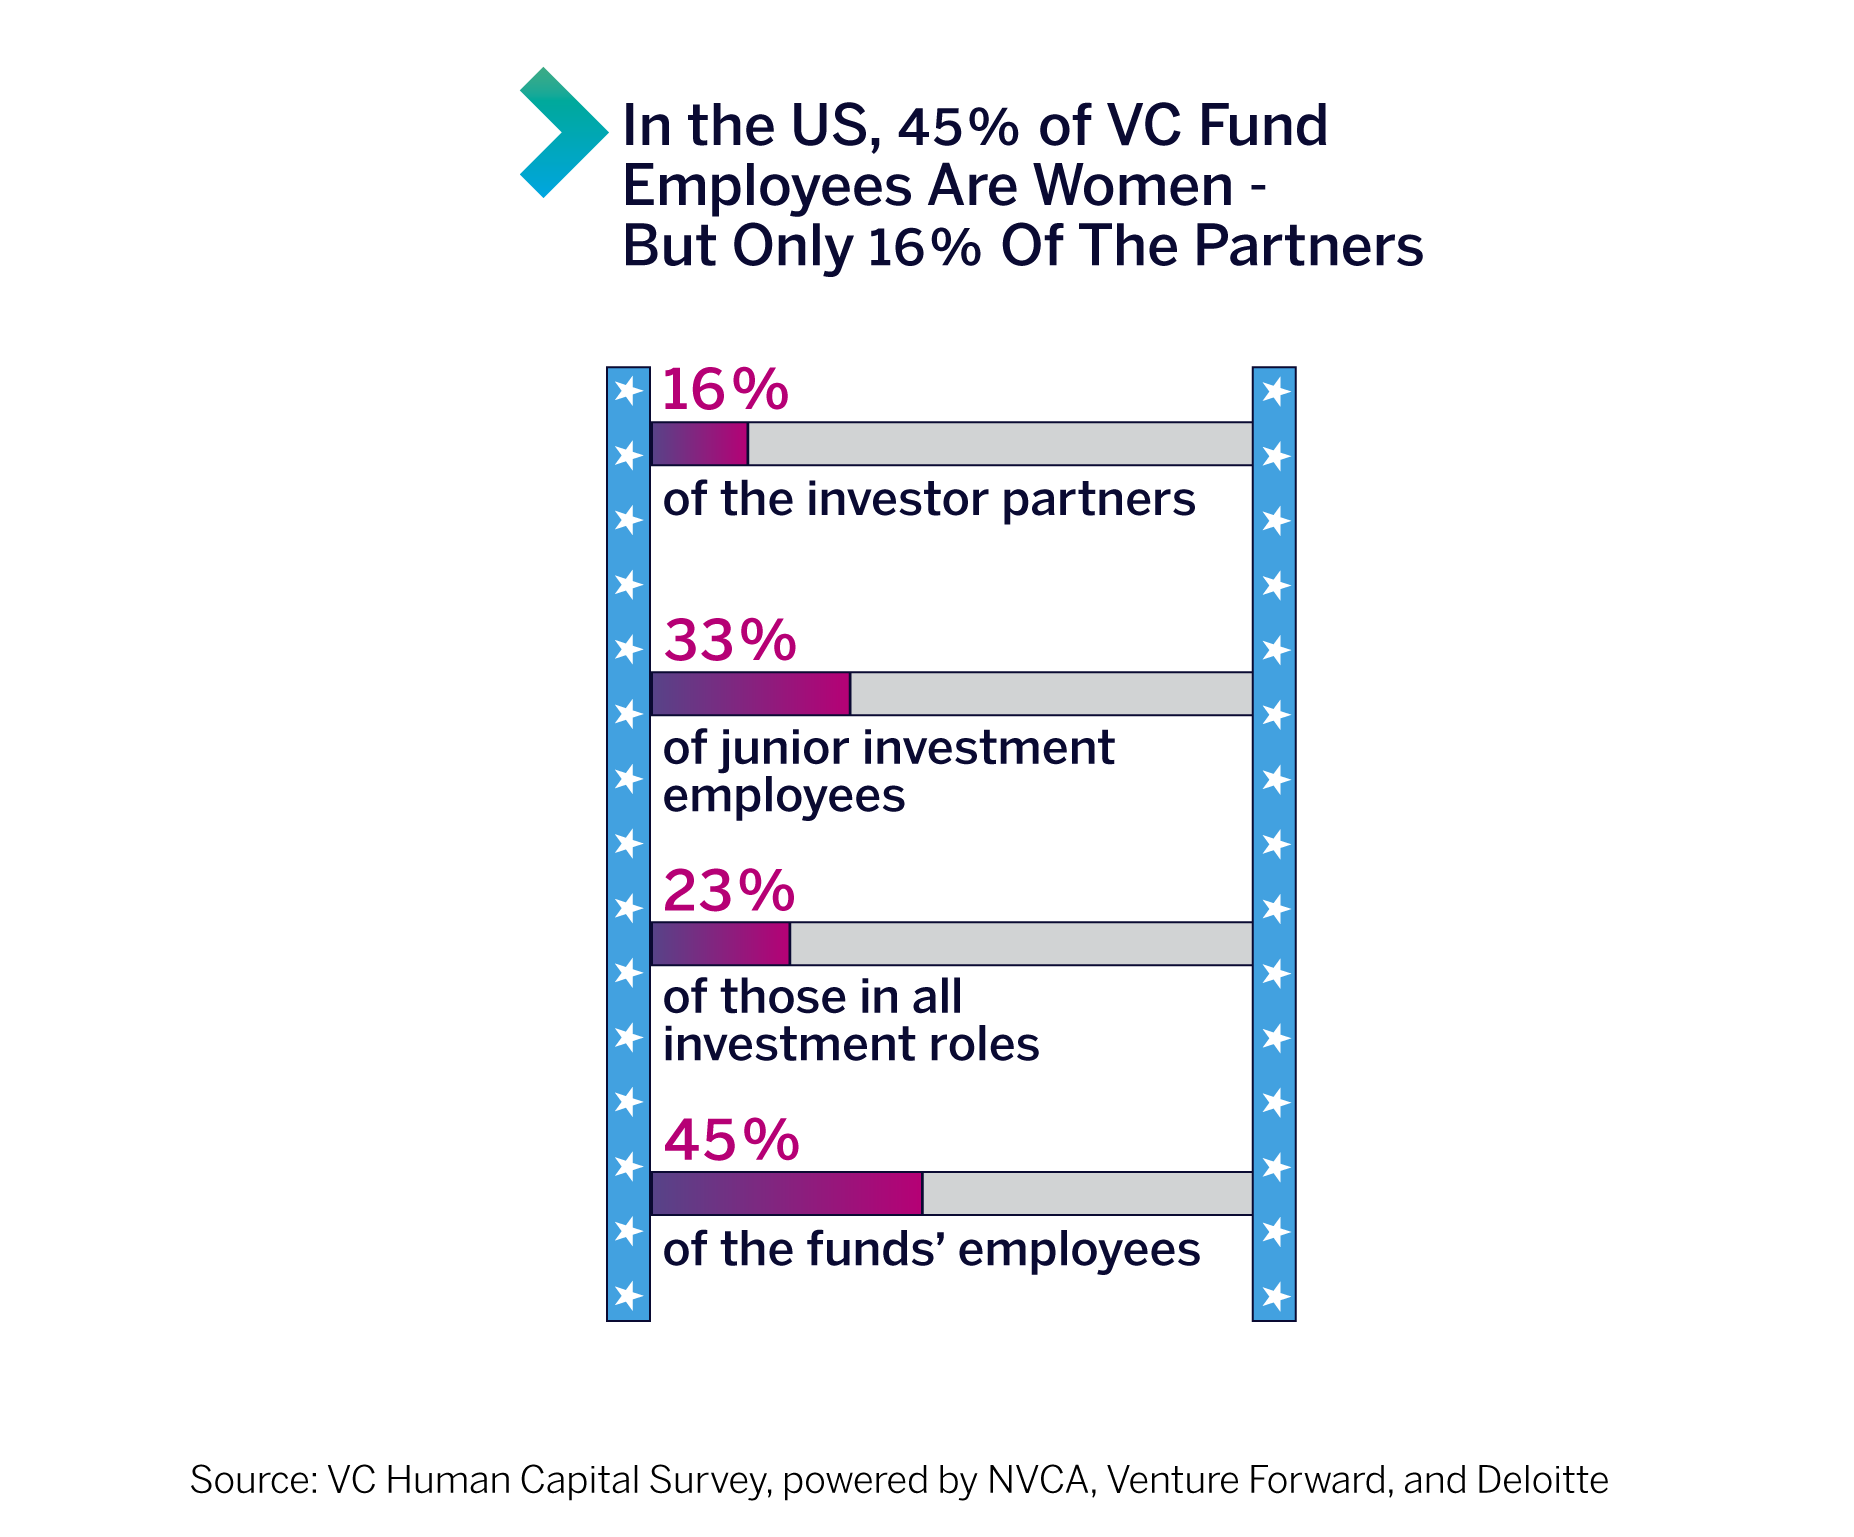 In the US, 45% of VC Fund Employees Are Women - But Only 16% Of The Partners